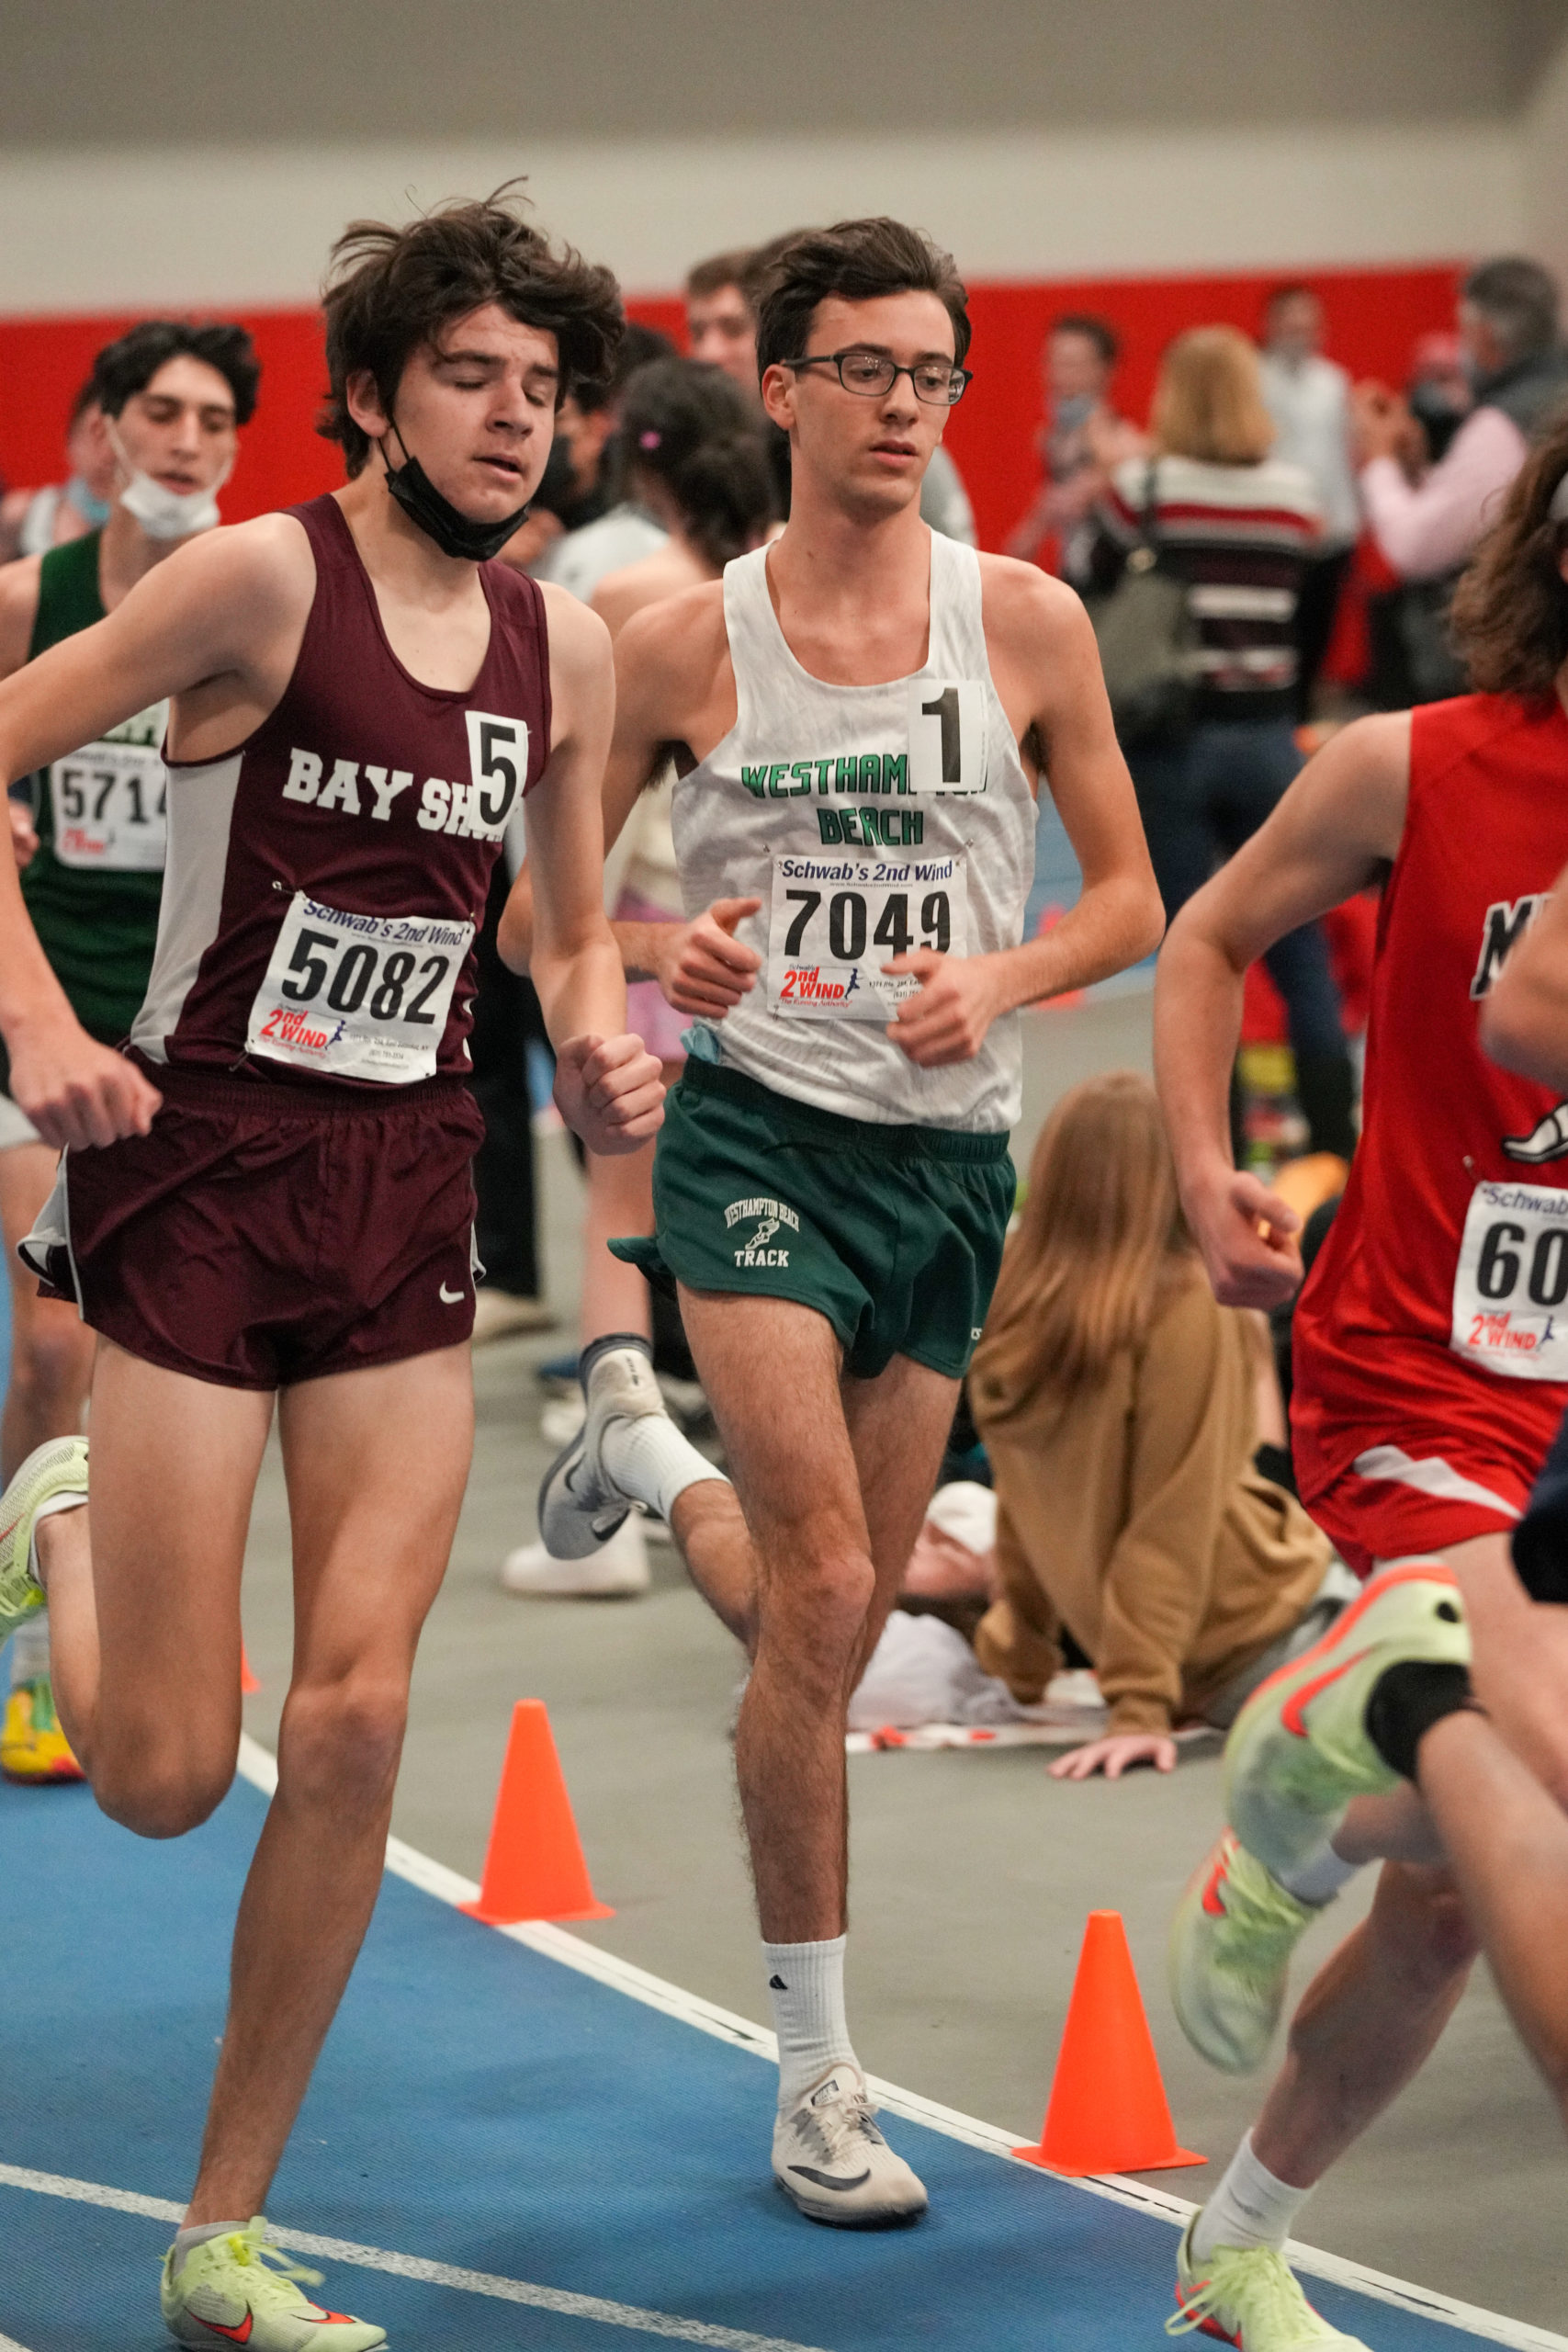 Westhampton Beach senior Gavin Ehlers won the 3,200-meter race and placed second in the 1,000-meter race.